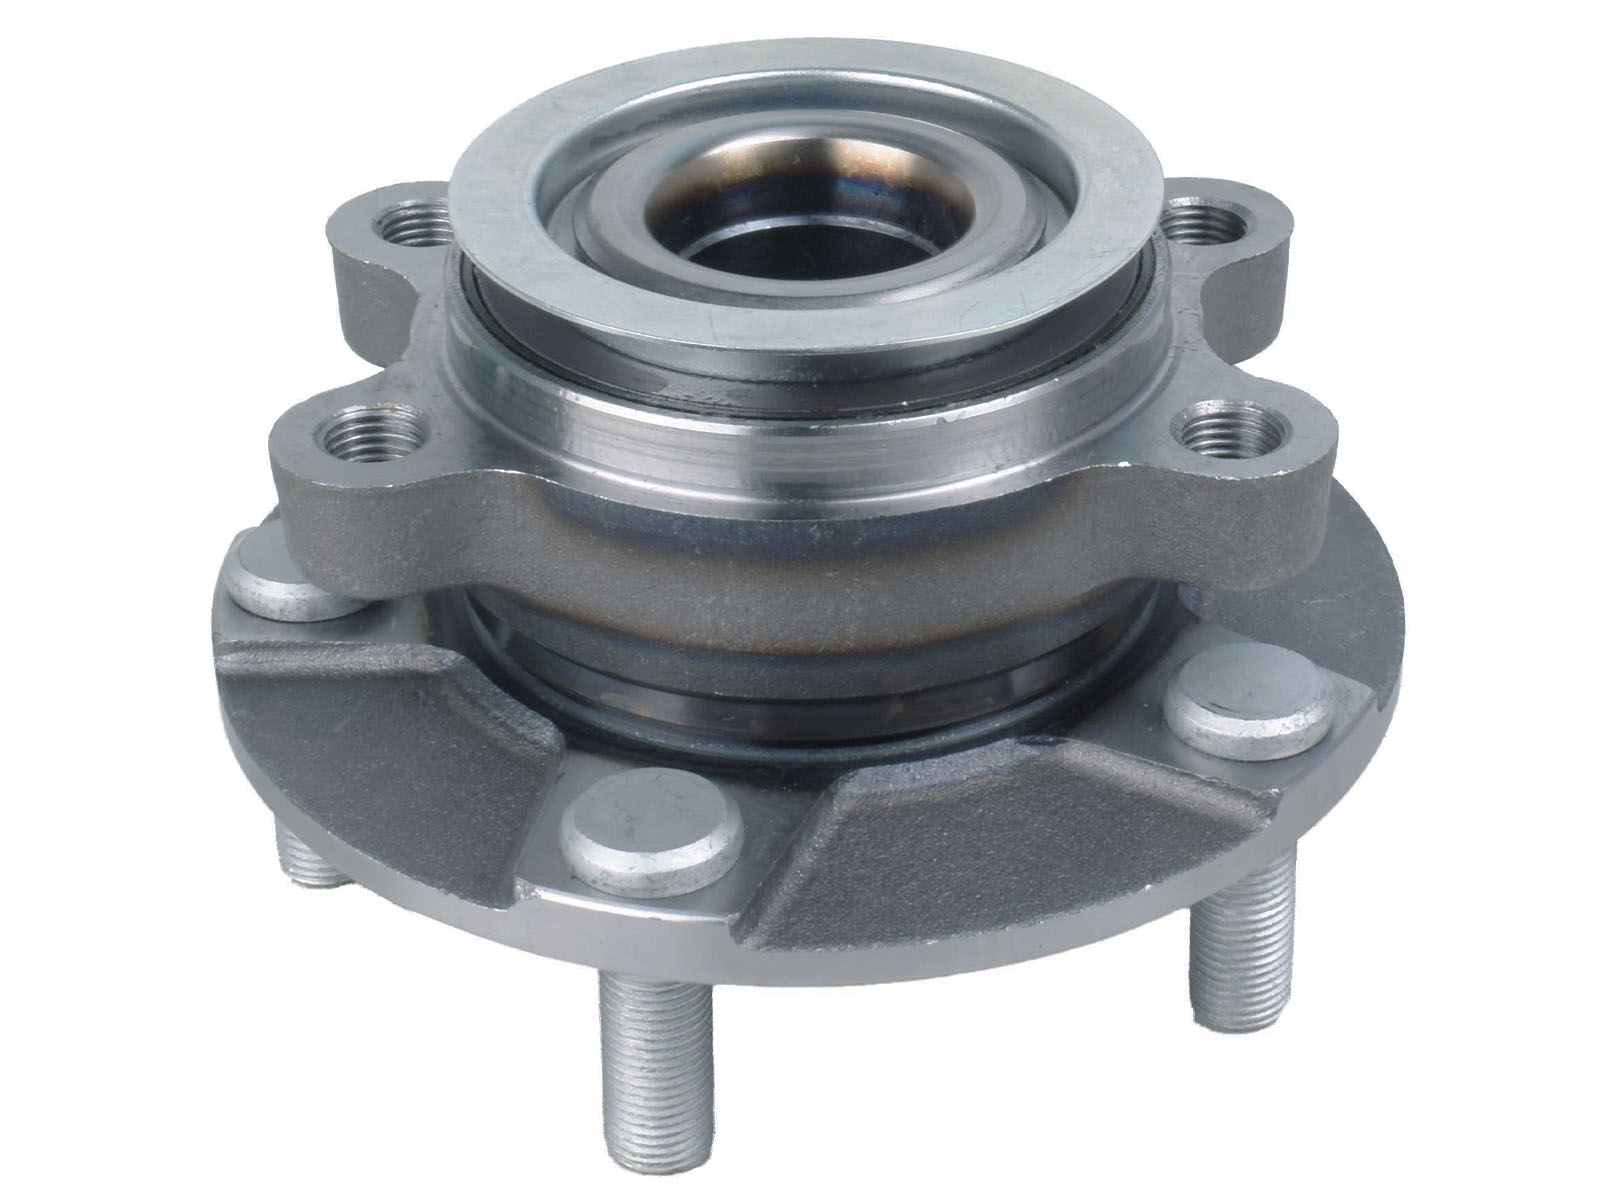 5 Lug-Hub QJZ Cross Reference: SKF BR930870, 051-6484 512530 Rear Driver and Passenger Side Wheel Hub Bearing Assembly Compatible with 2013-2019 Nissan Sentra 2-Pack 